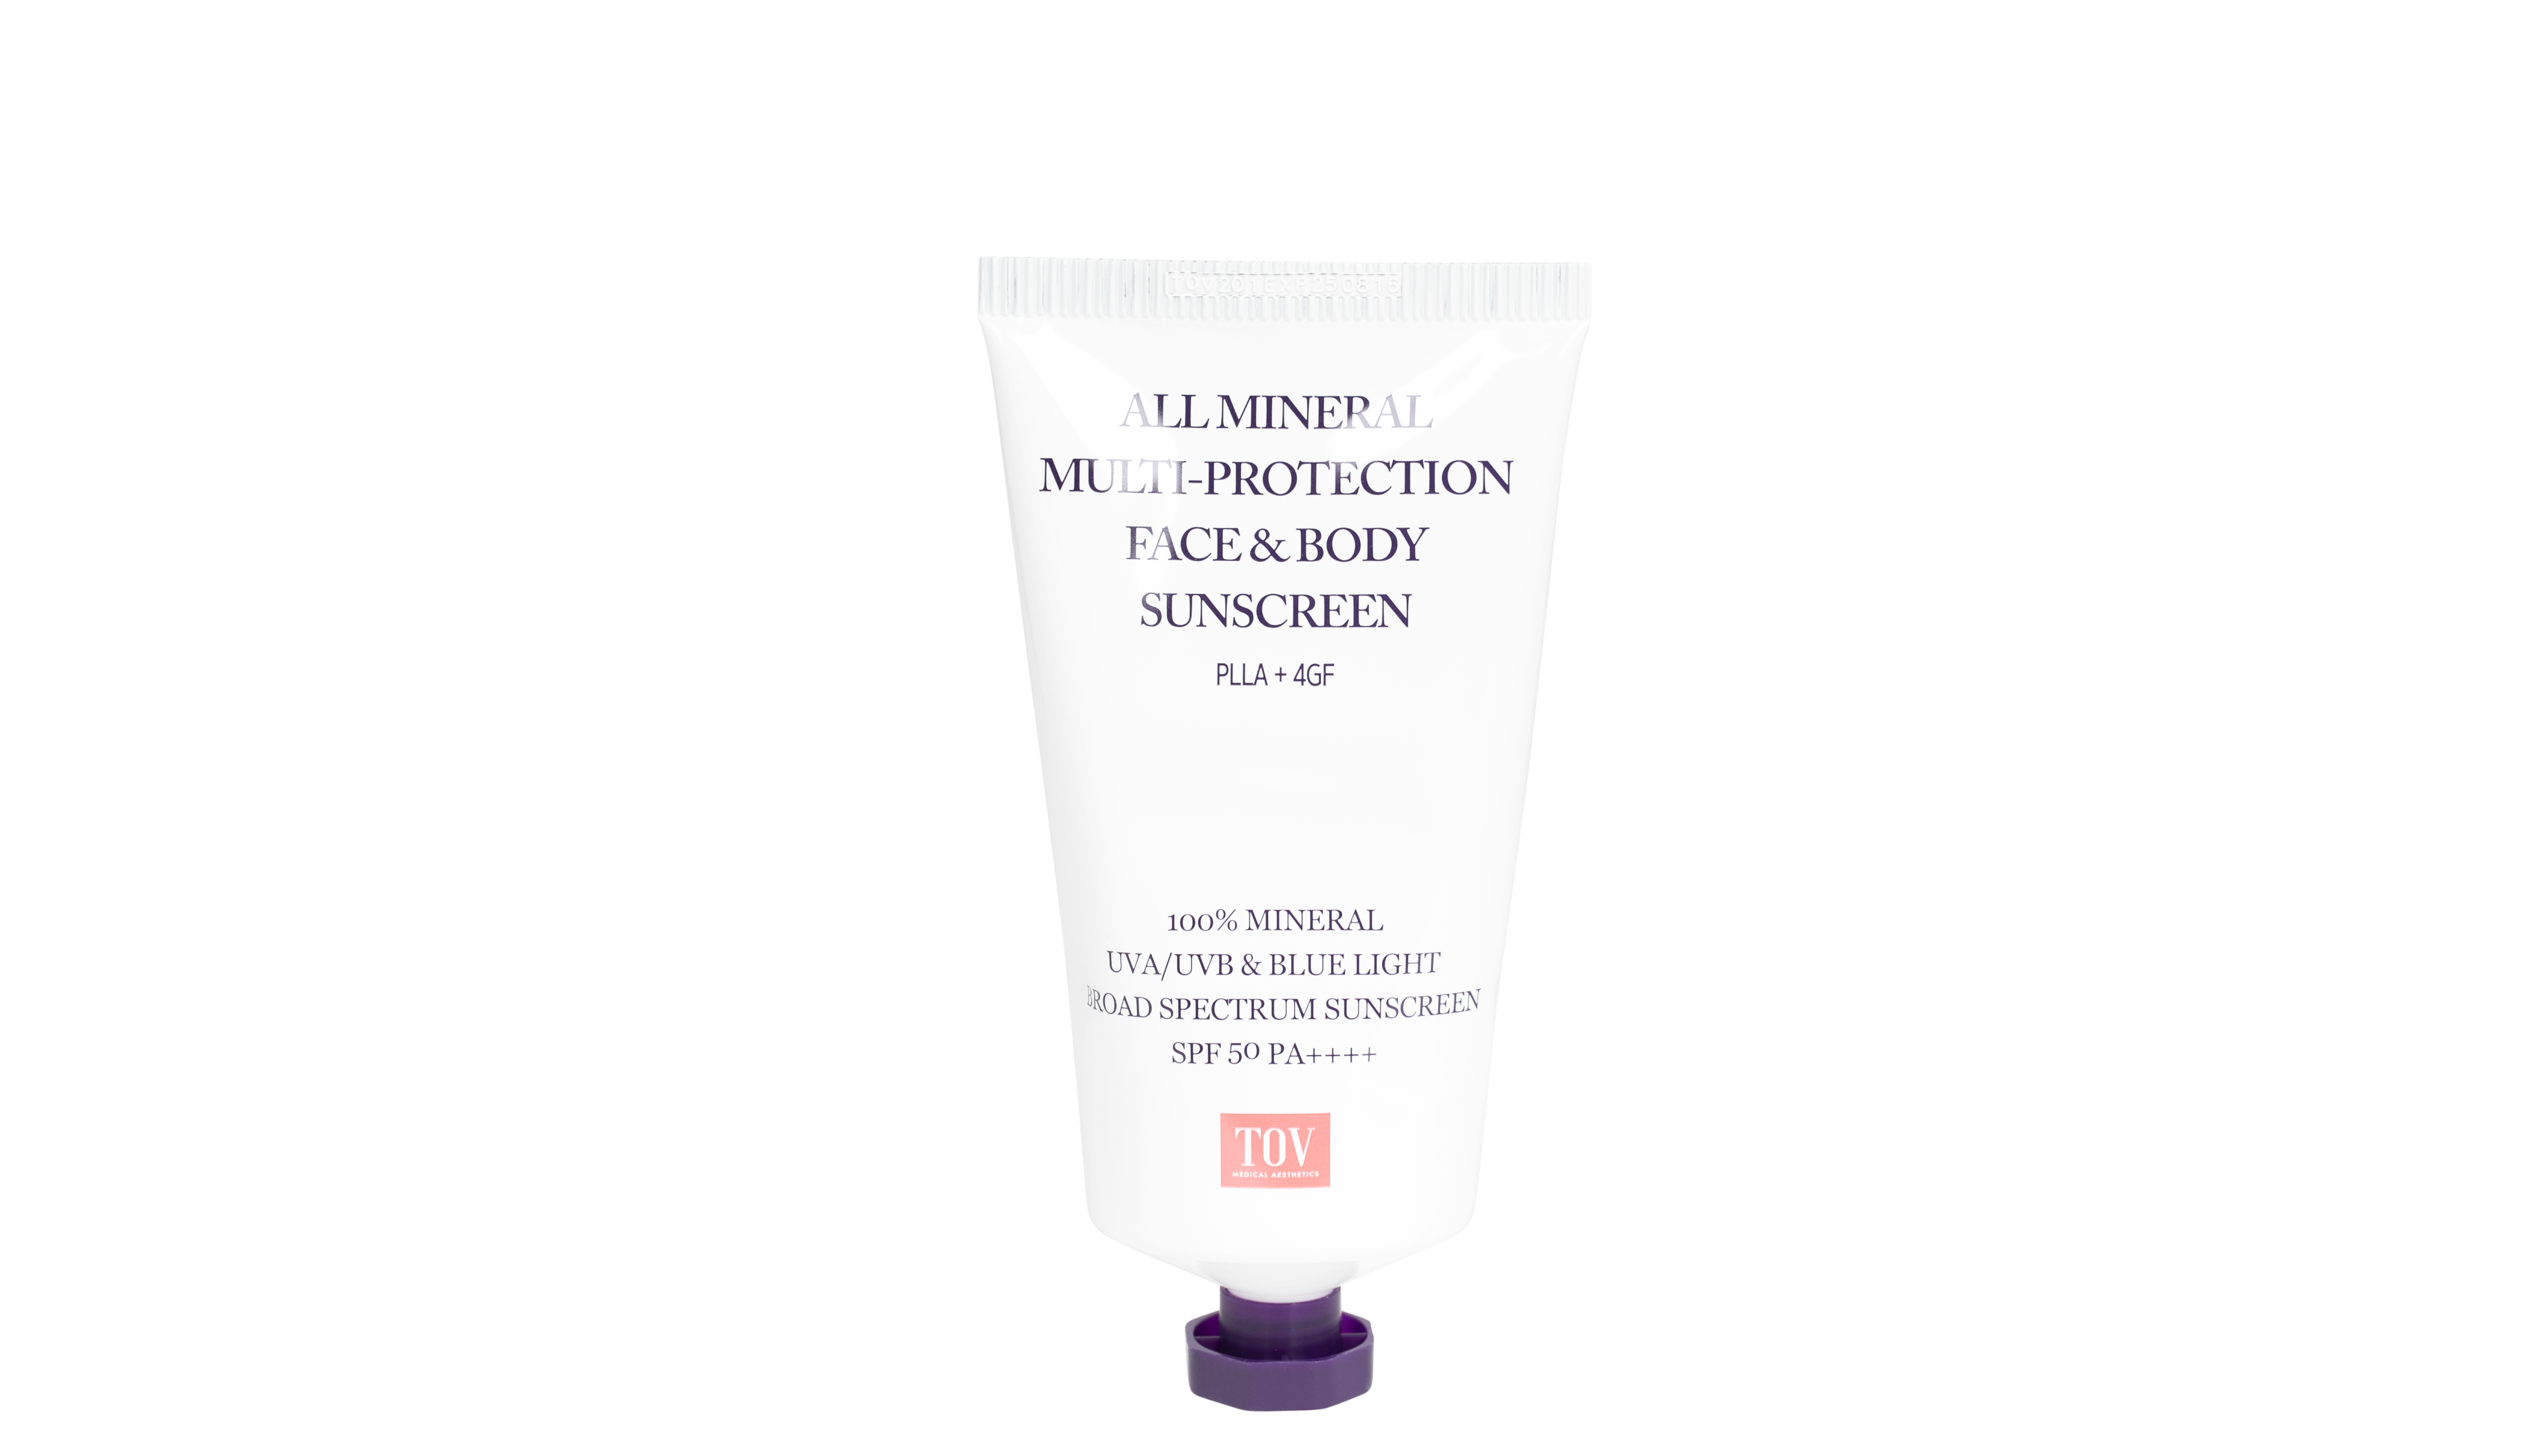 HOUSE OF PLLA® HOP+ All Mineral Multi-Protection Face & Body Sunscreen 150ml Retail $155 - SPECIAL OFFER